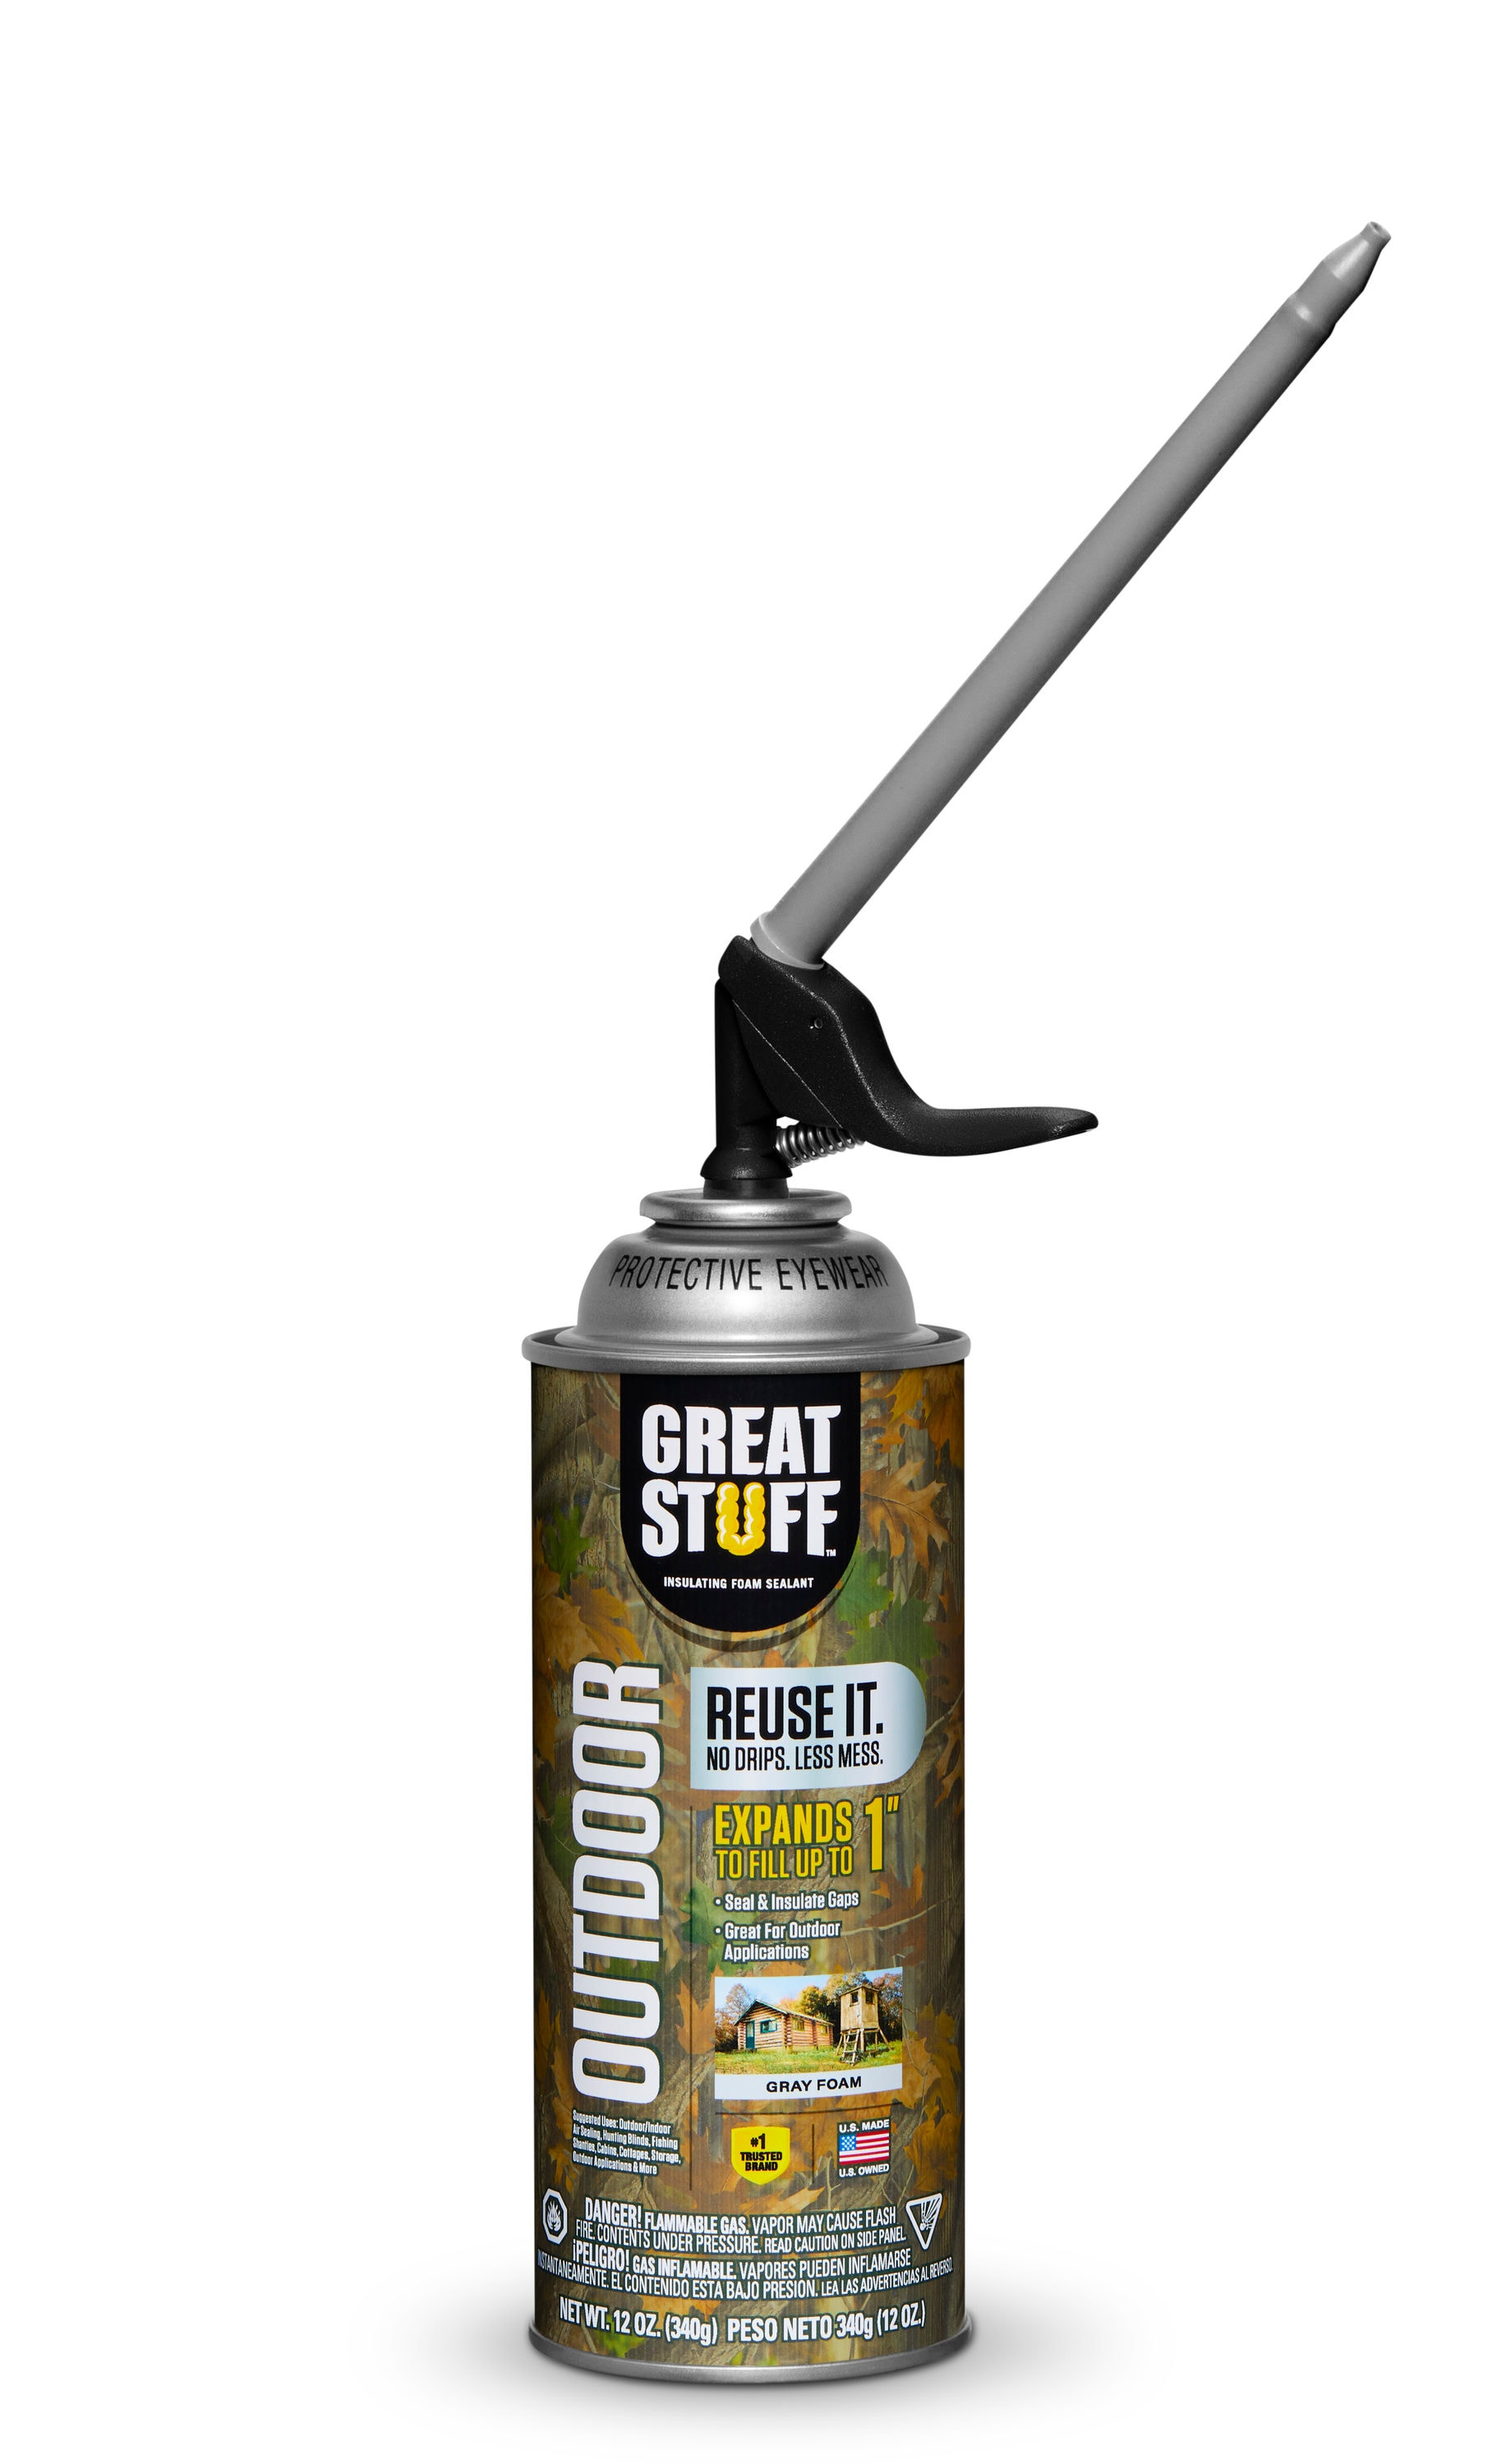 Universal Fitting Fit 'N Seal Spray Nozzle with Spray Top - Reuse Plastic  Bottles - Fit 'N Seal Clean/Sprayer